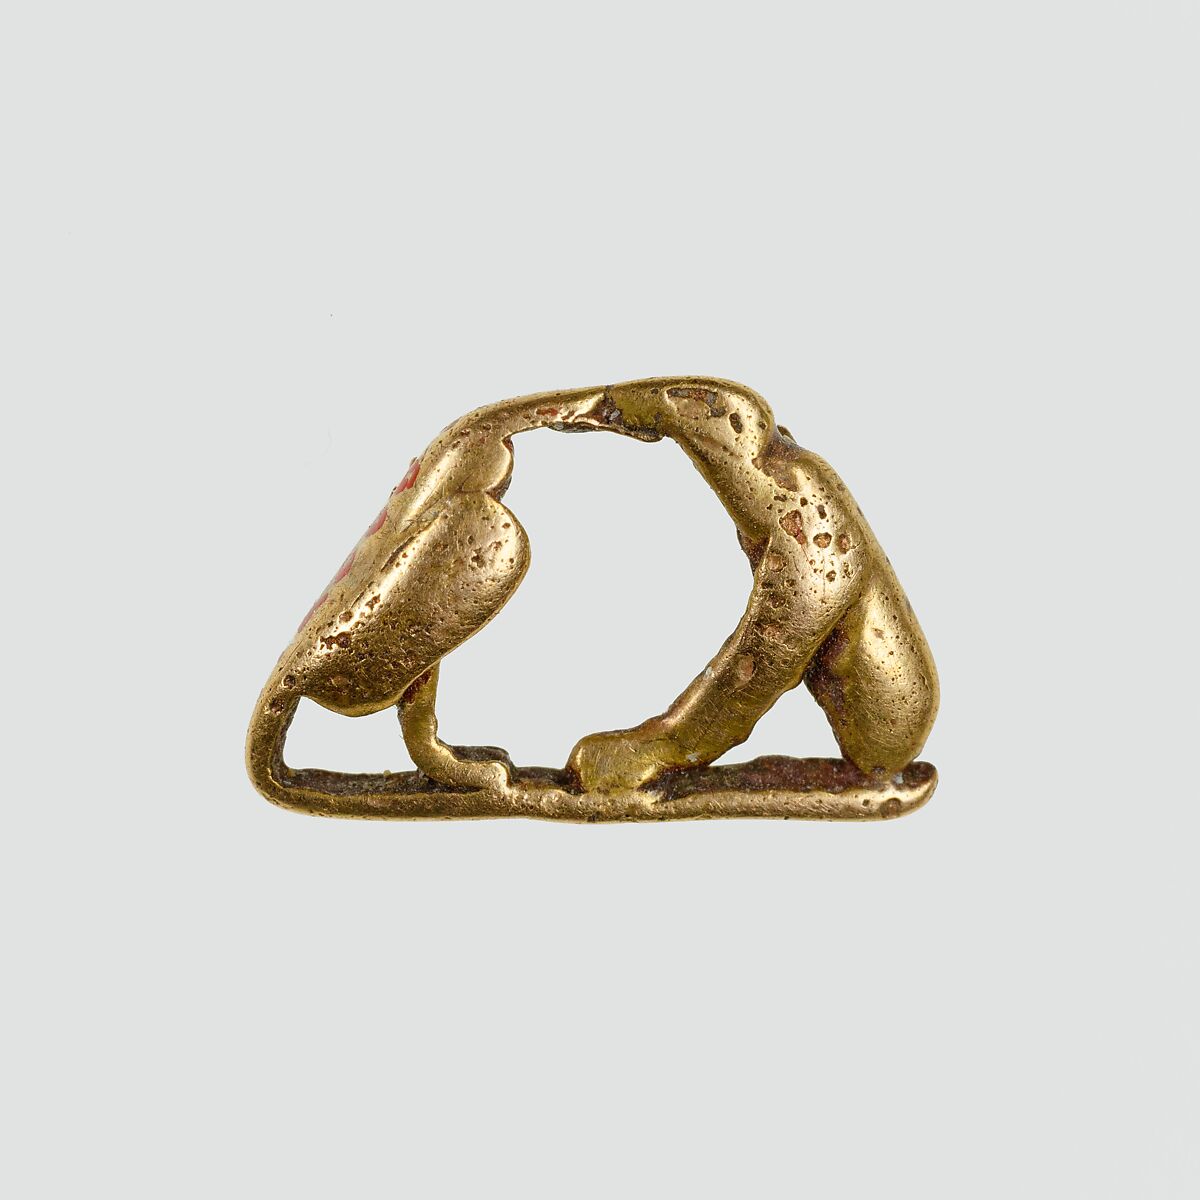 Vulture and falcon amulet, Gold 